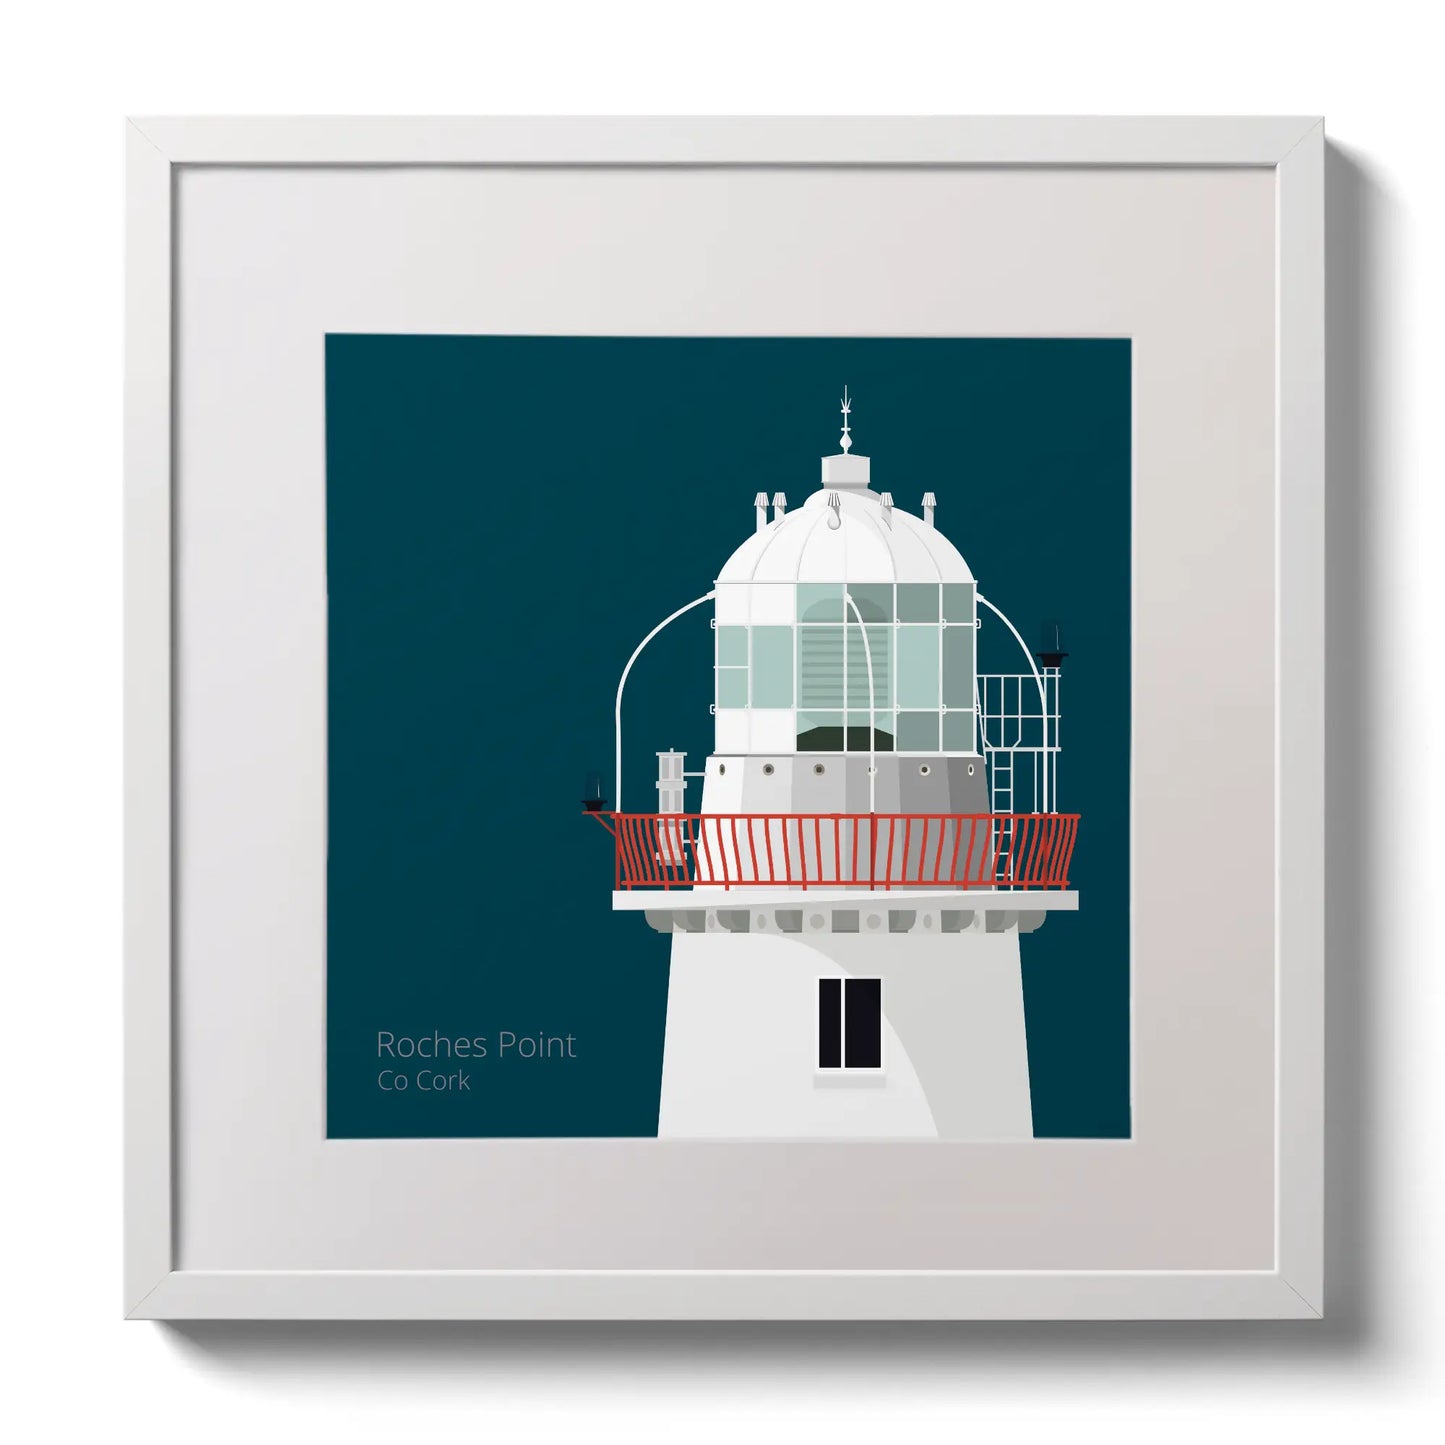 Illustration of Roches Point lighthouse on a midnight blue background,  in a white square frame measuring 30x30cm.